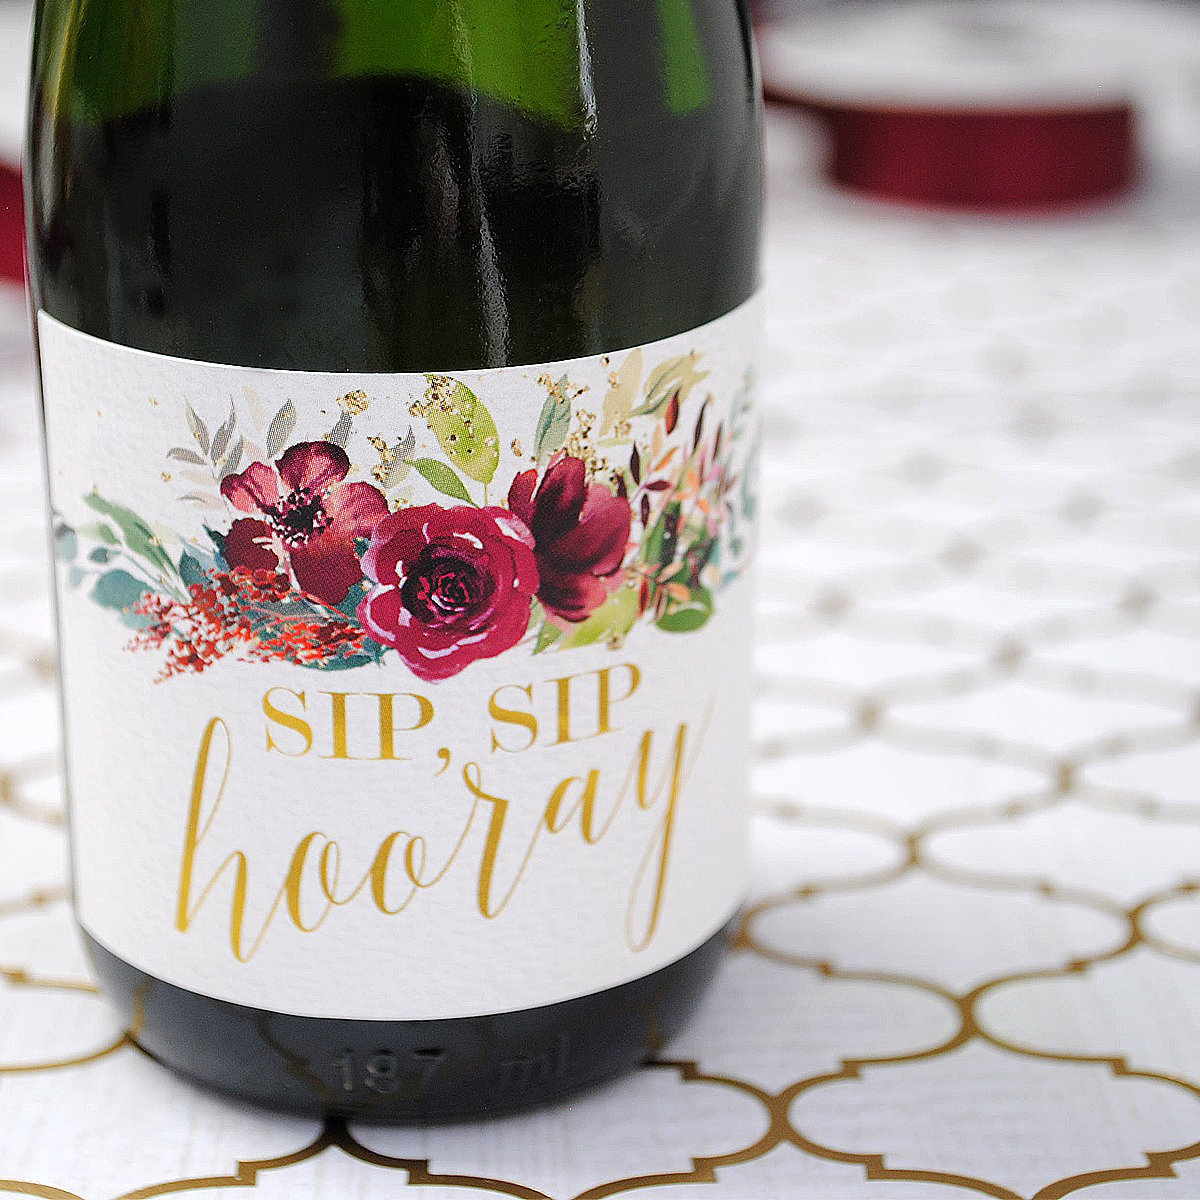 Custom mini Champagne labels with SIP SIP HOORAY design